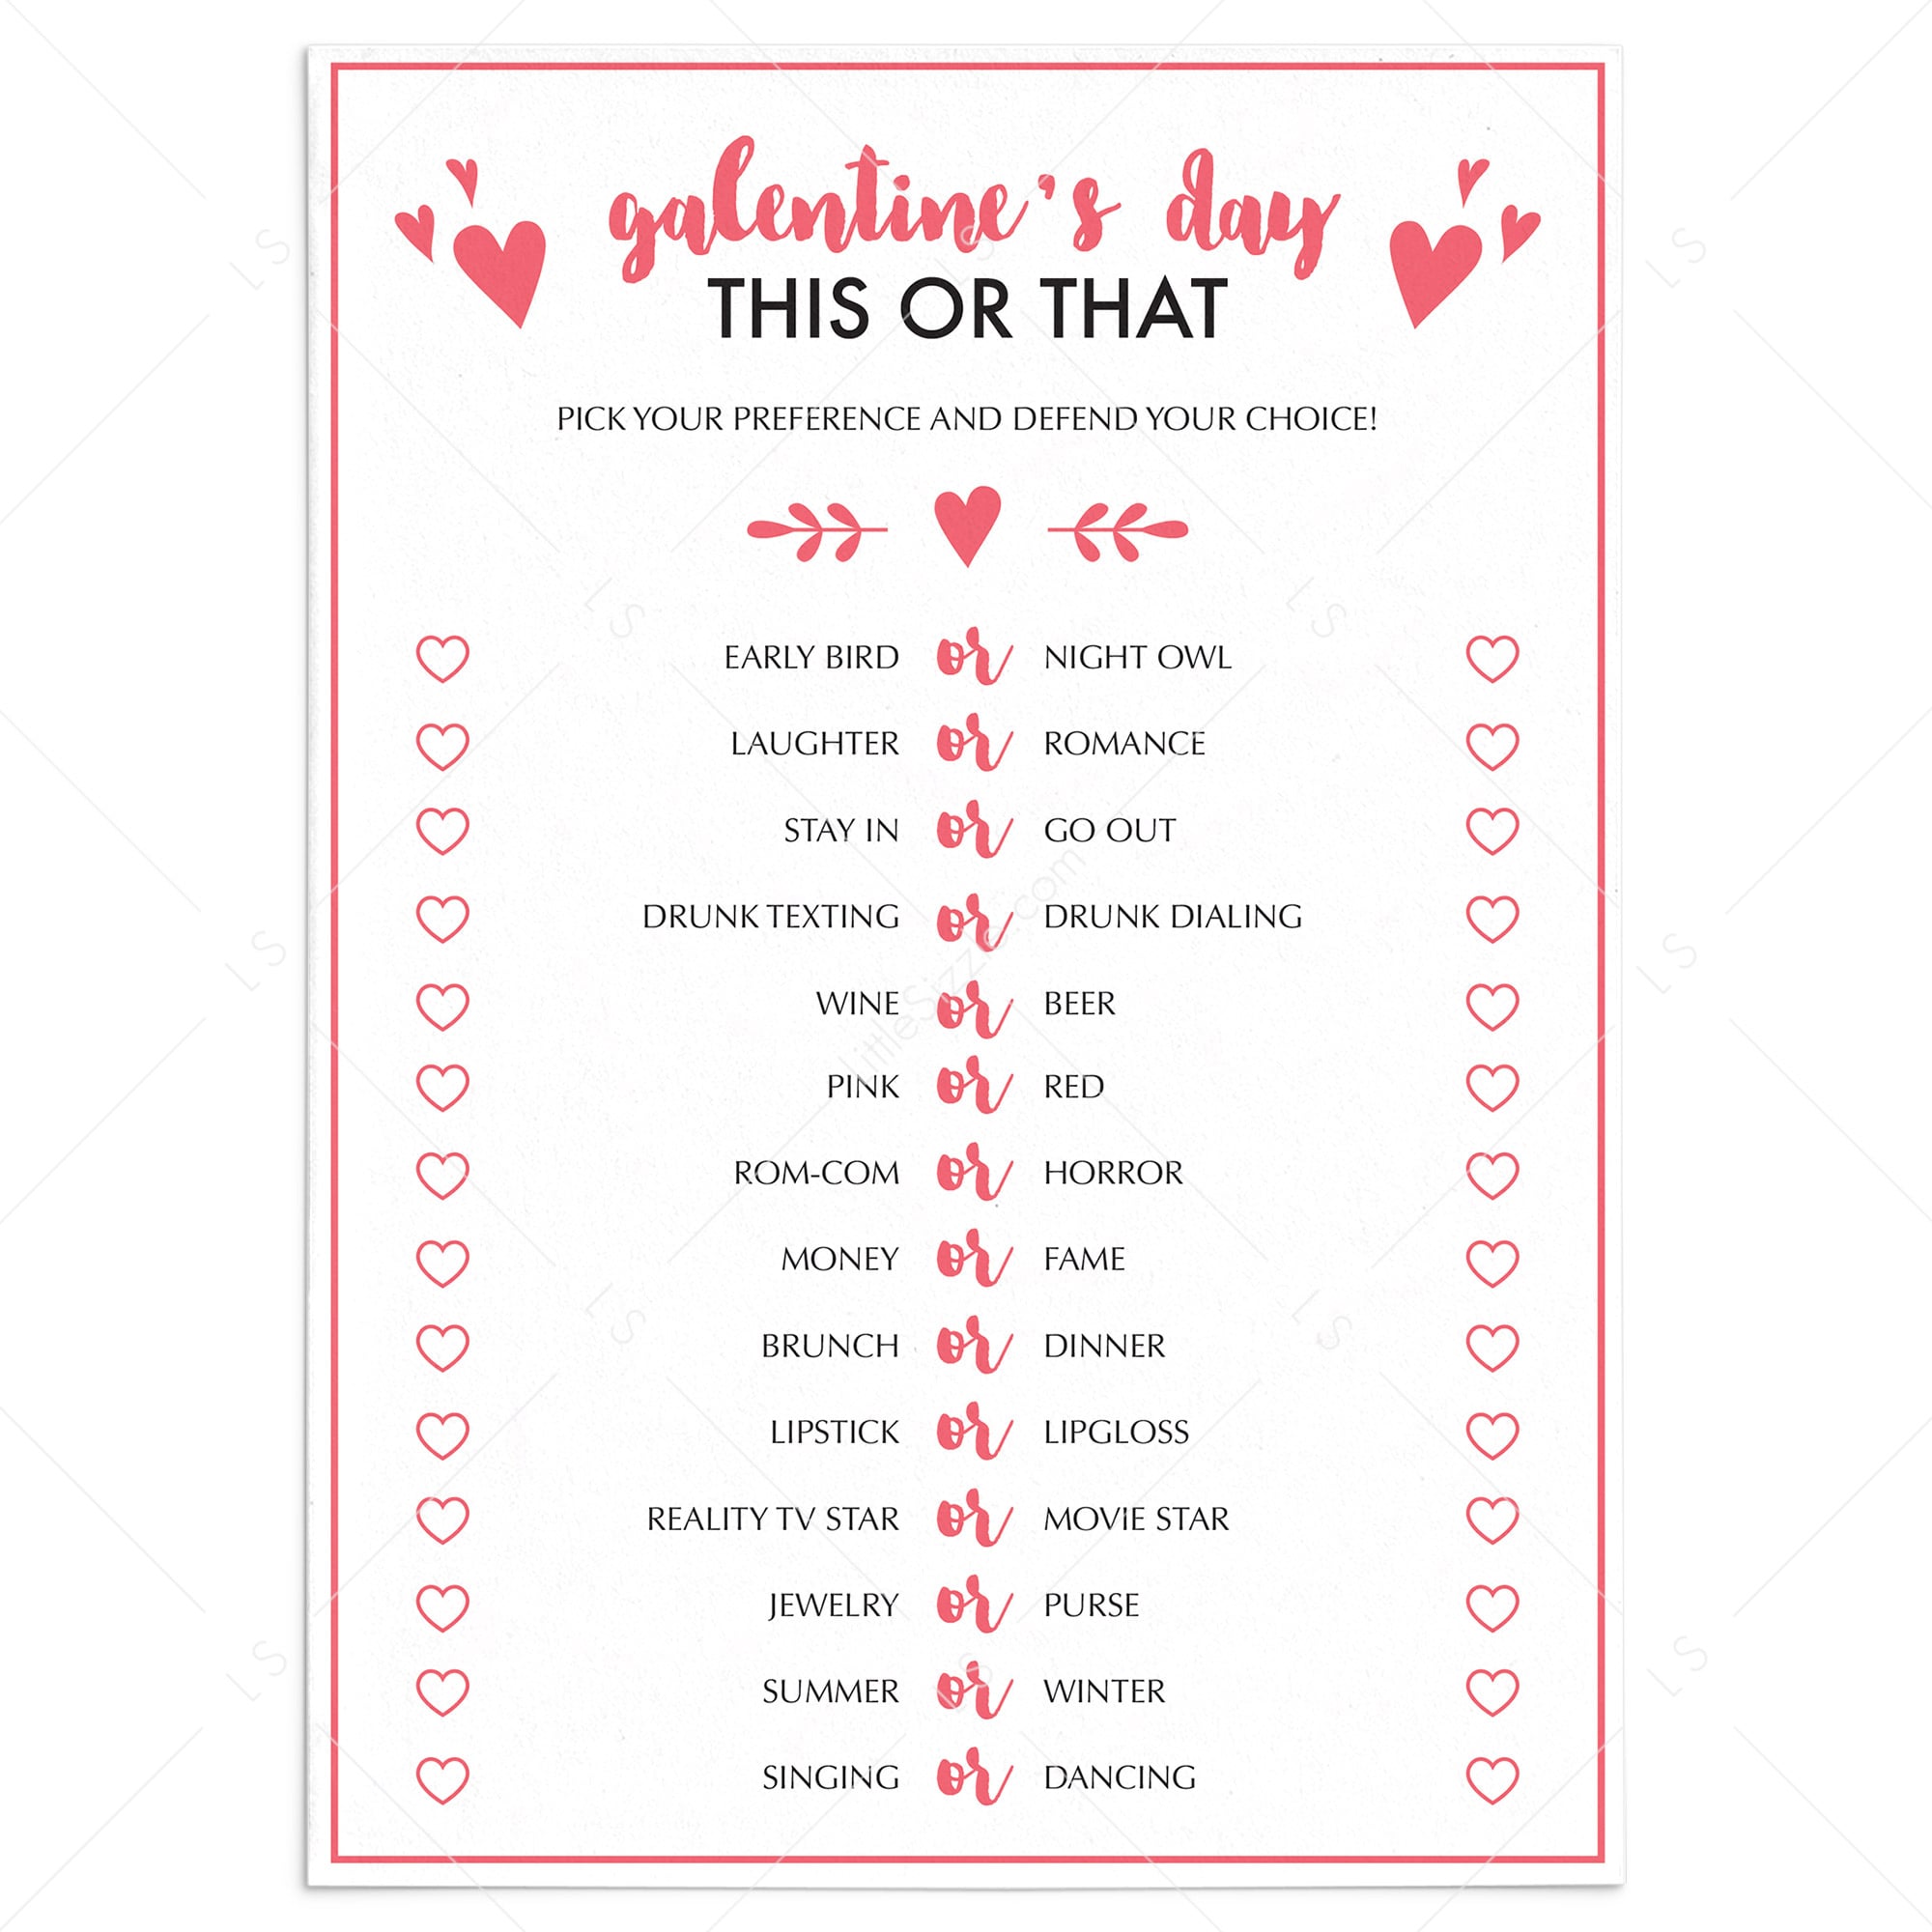 Fun Galentine's Day Party Game This Or That by LittleSizzle